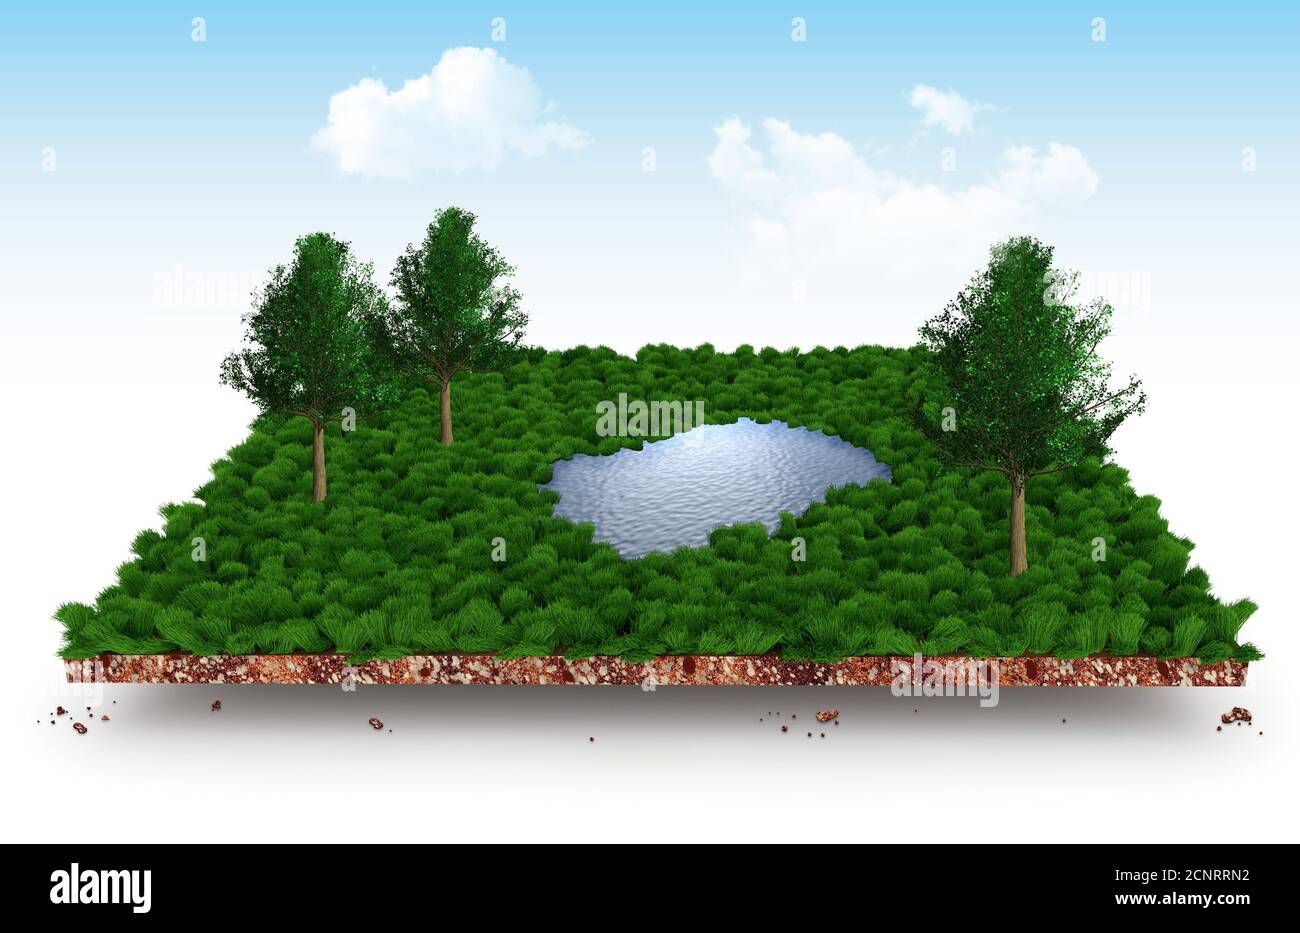 Section of soil layers with meadow, trees and lake 3d illustration Stock Photo